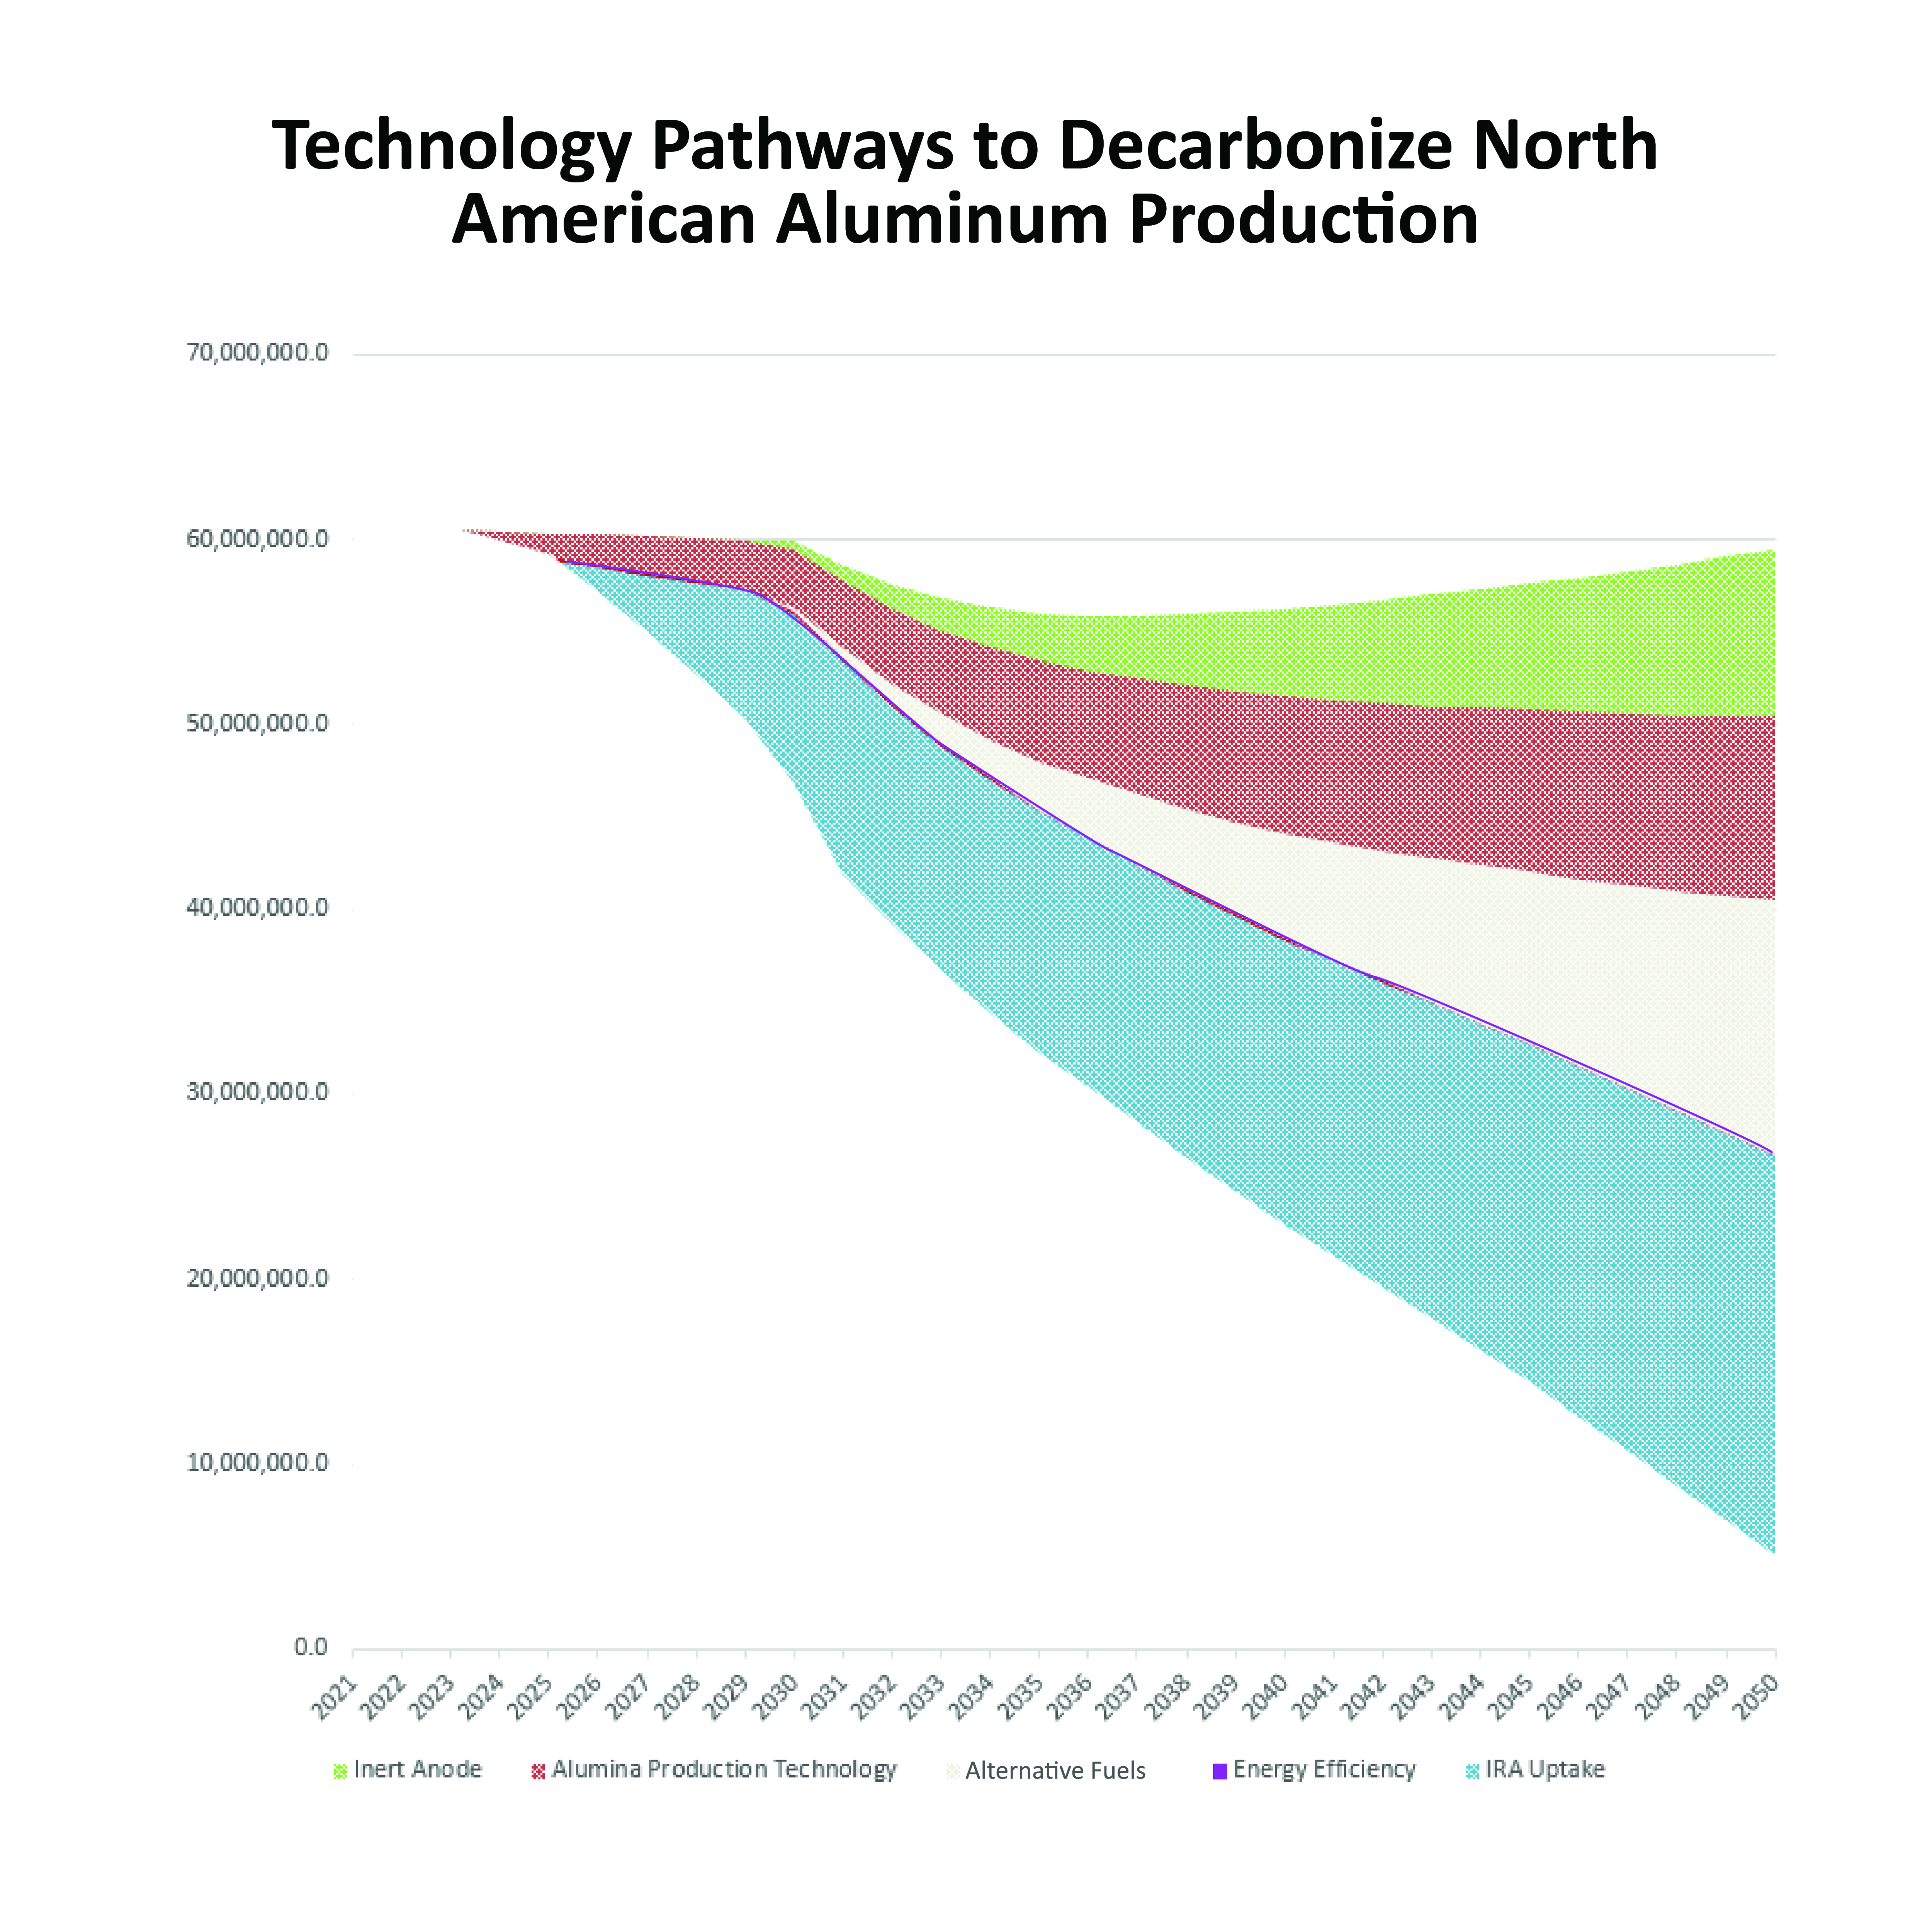 Chart showing technology pathways to decarbonization in North America